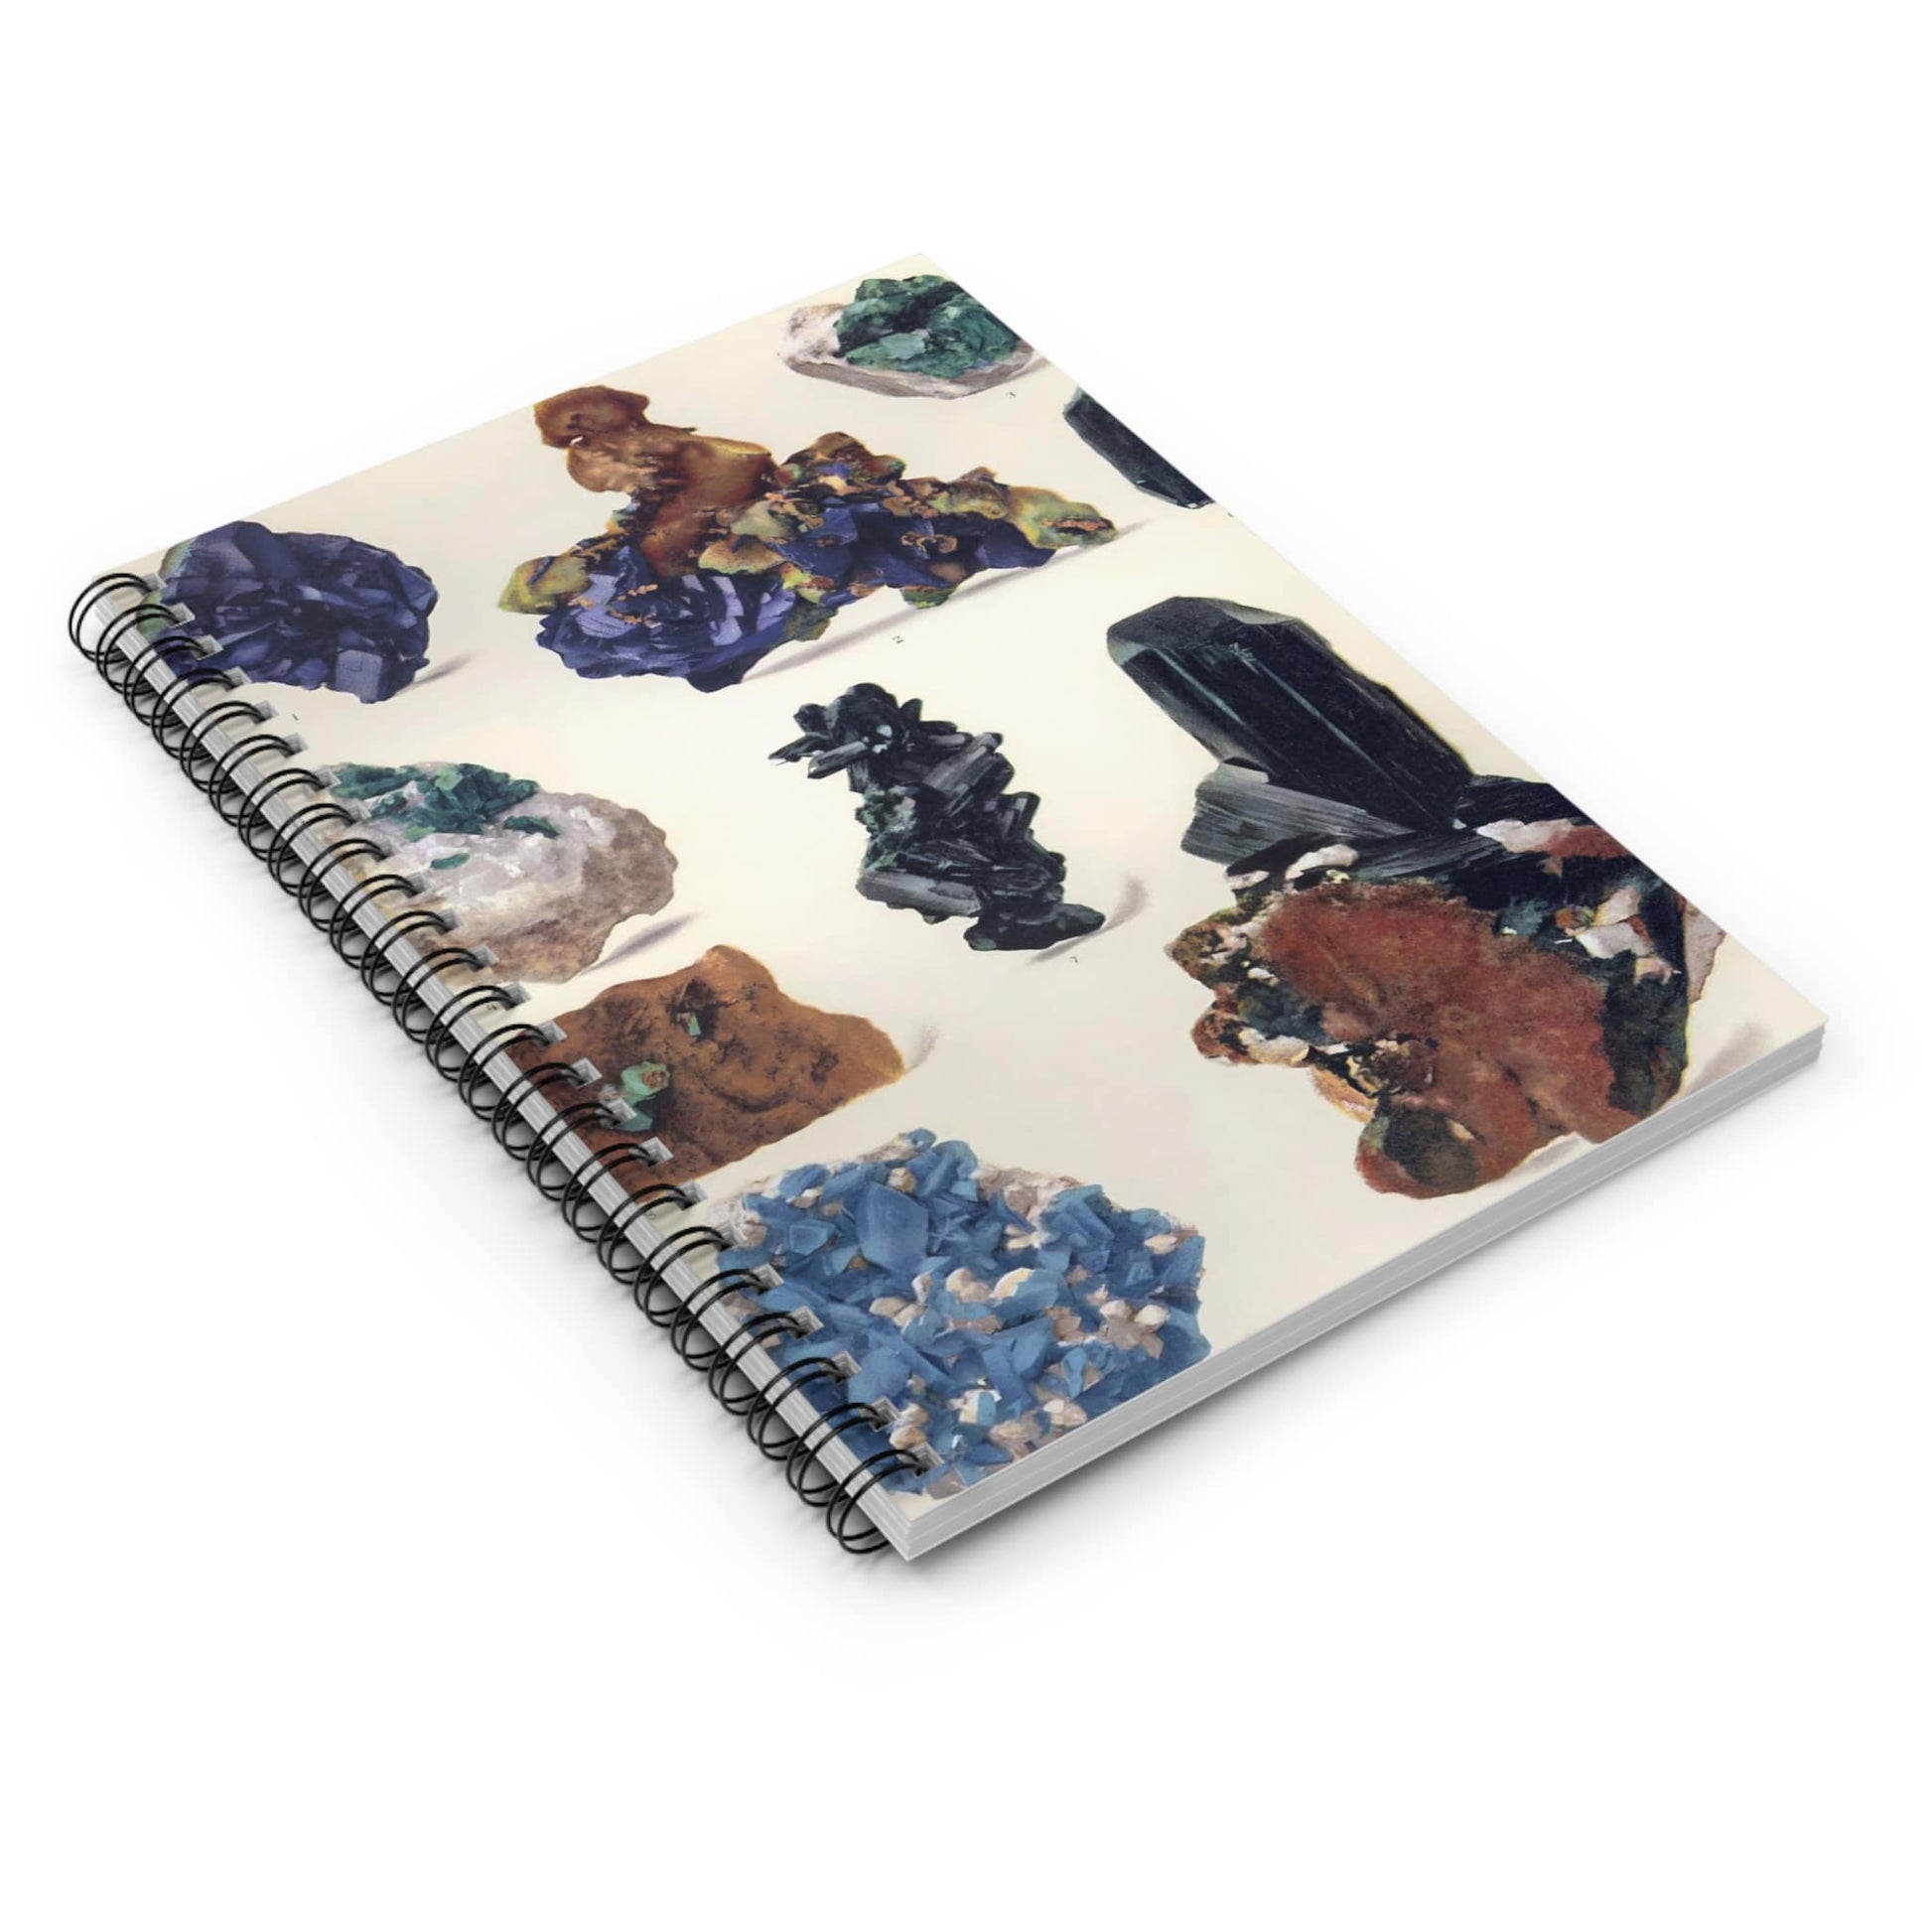 Colorful Gemstone Spiral Notebook Laying Flat on White Surface